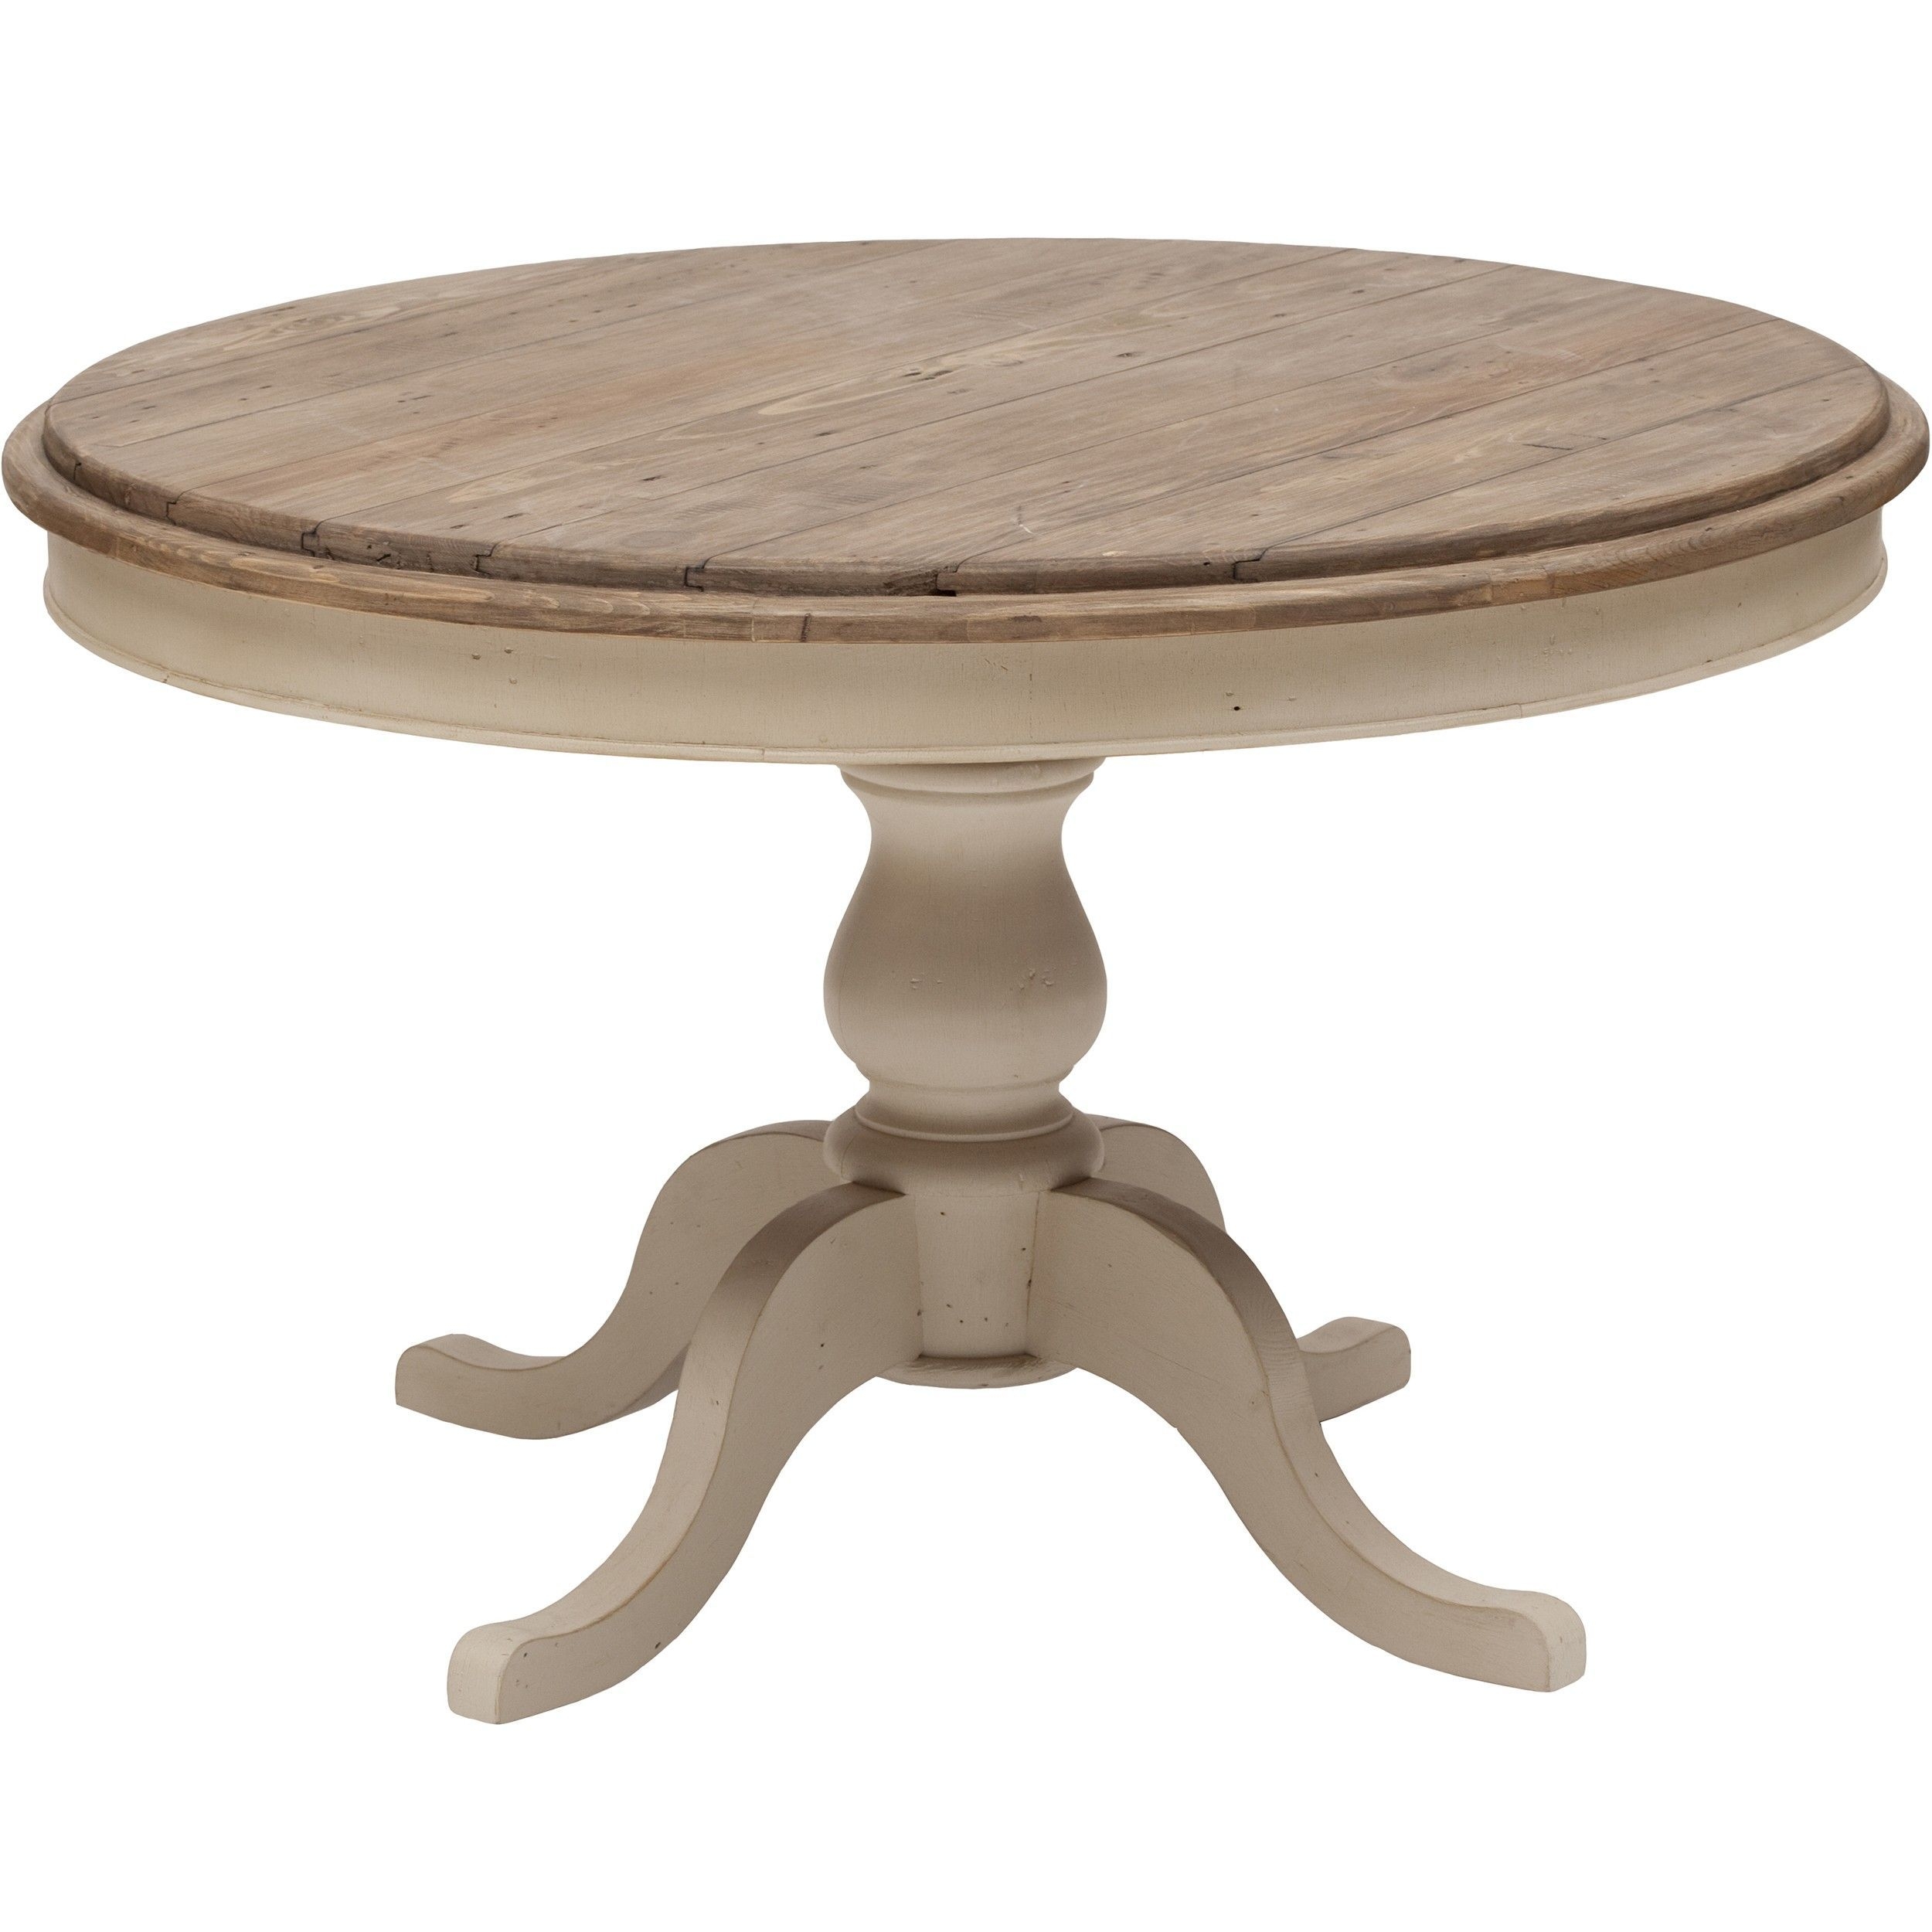 Round white pedestal dining table